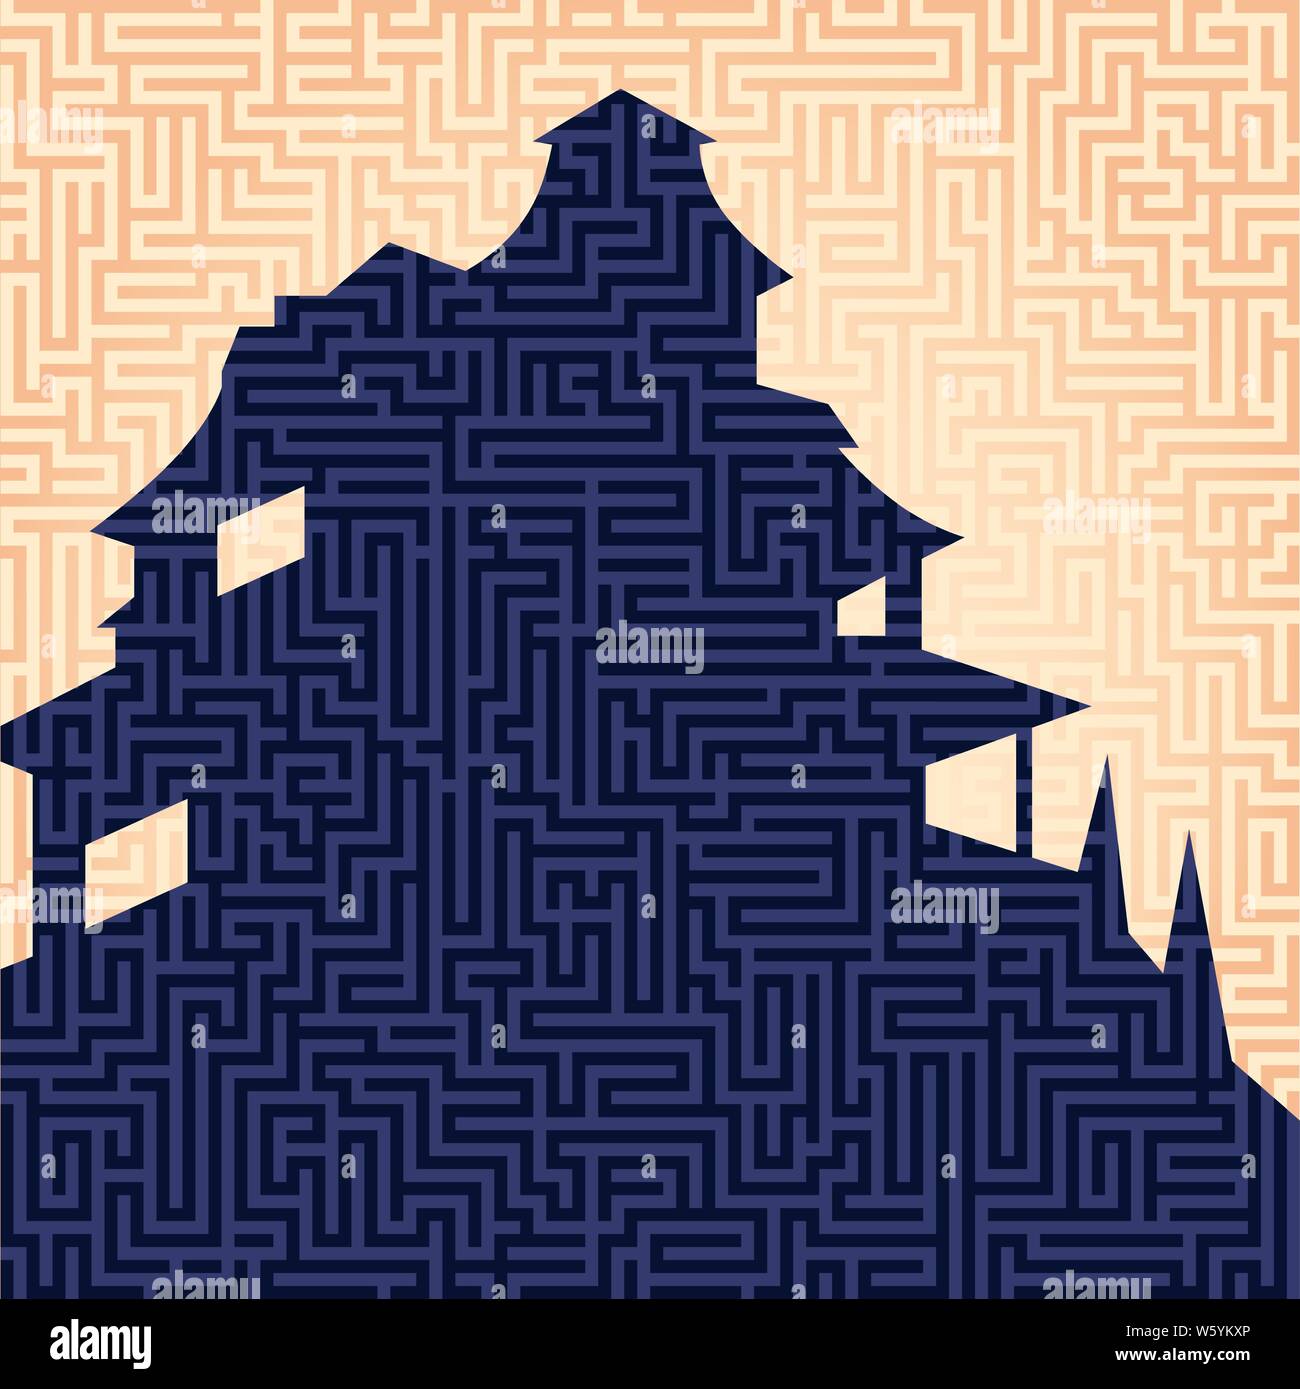 Vector illustration. Mansion silhouette with maze or labyrinth texture. Isolated. Stock Vector